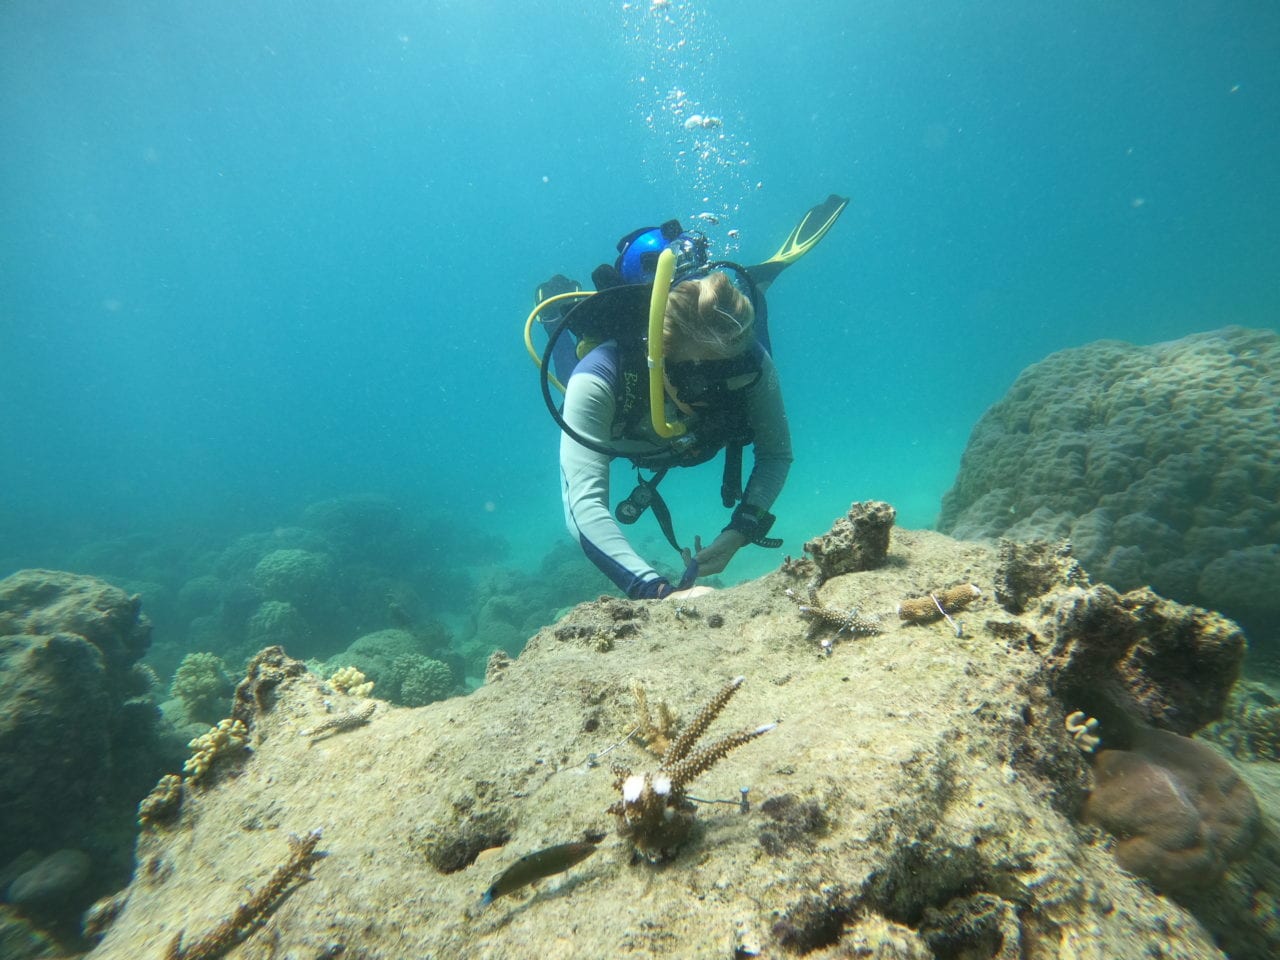 Underwater photo of diver attaching coral to reef crop on 31 Jan 20